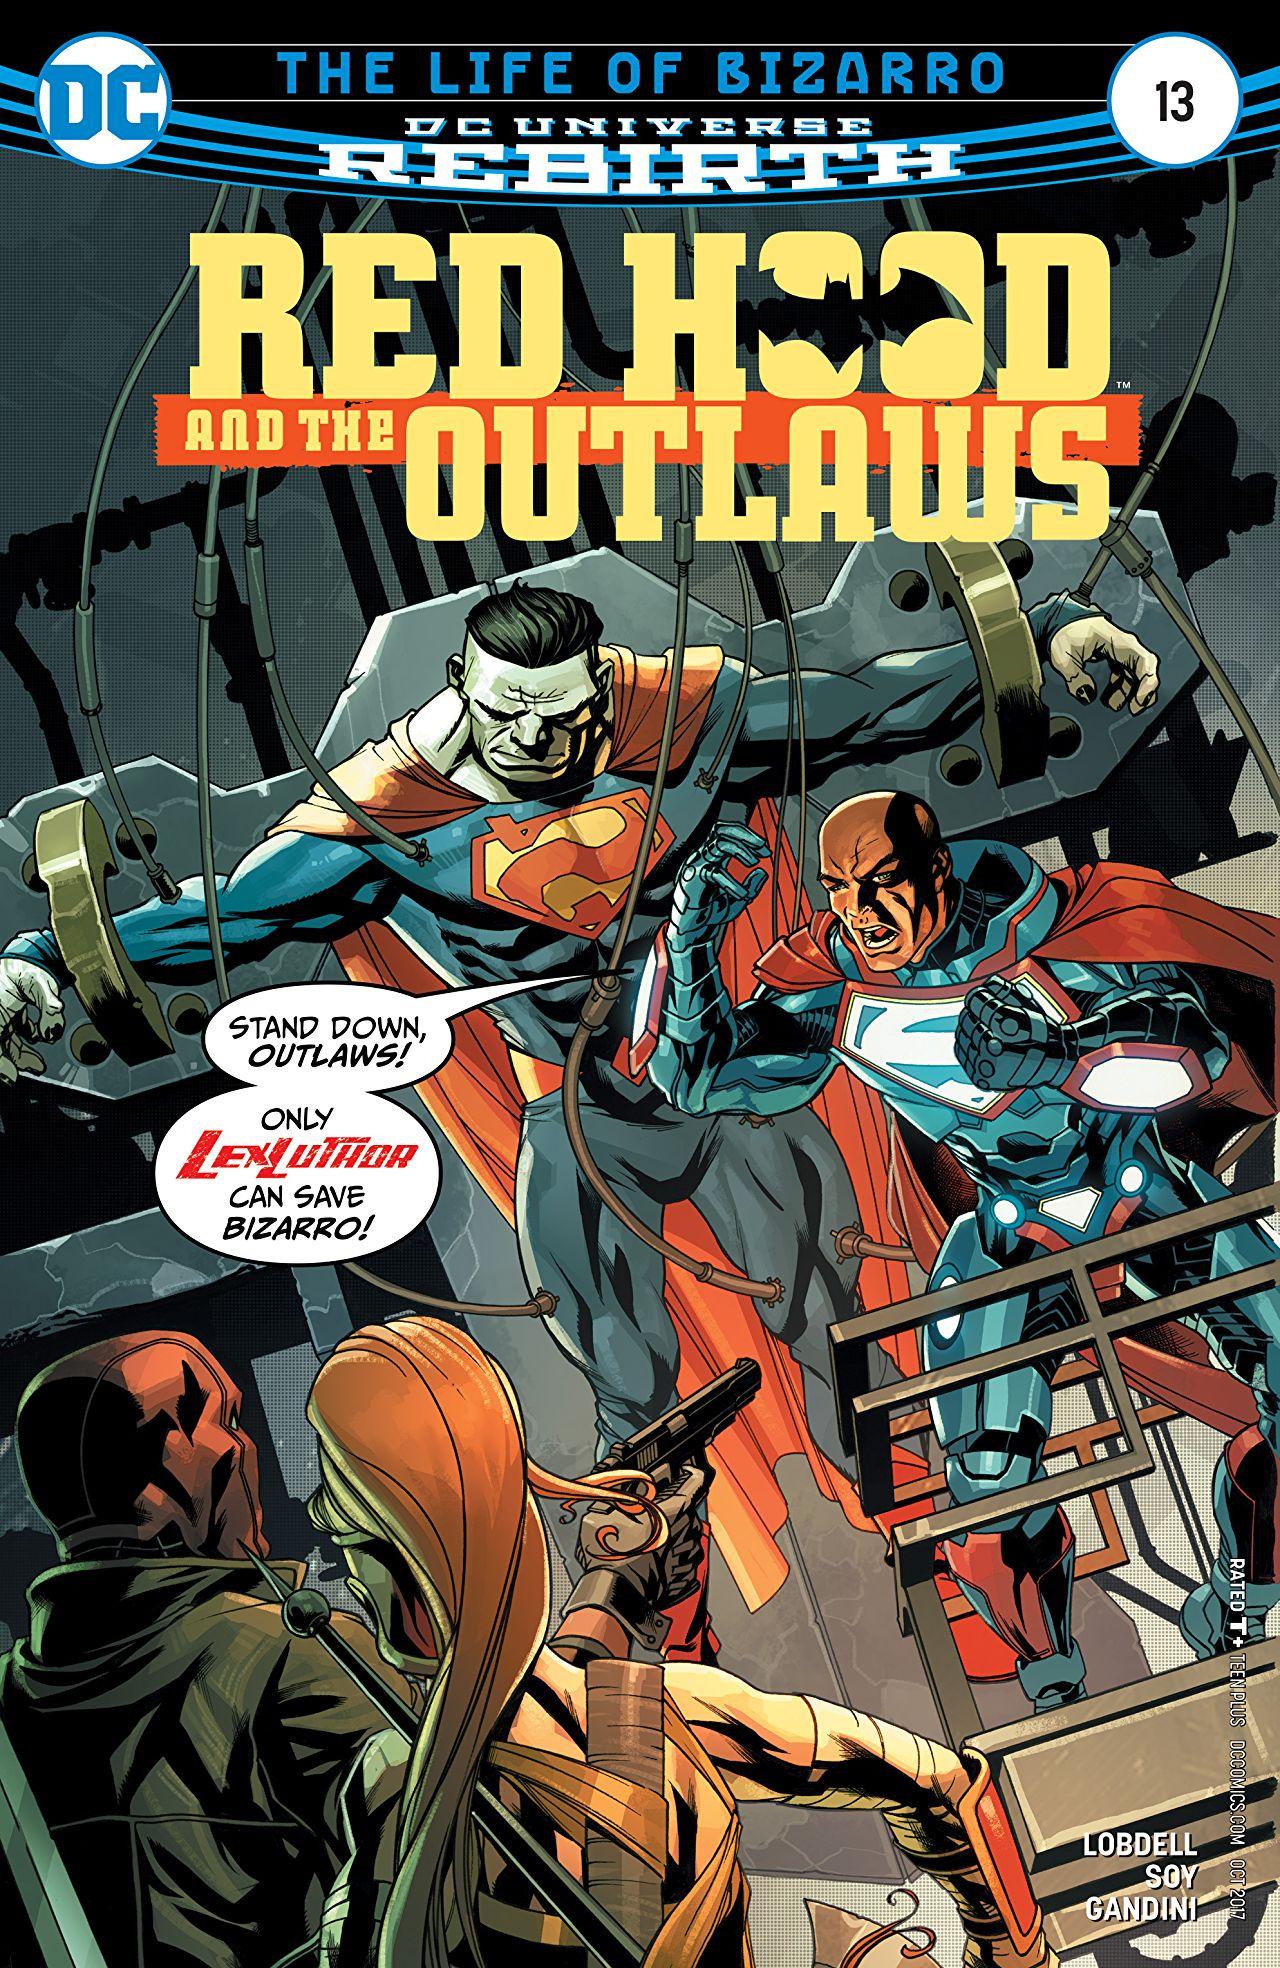 Red Hood and the Outlaws Vol. 2 #13